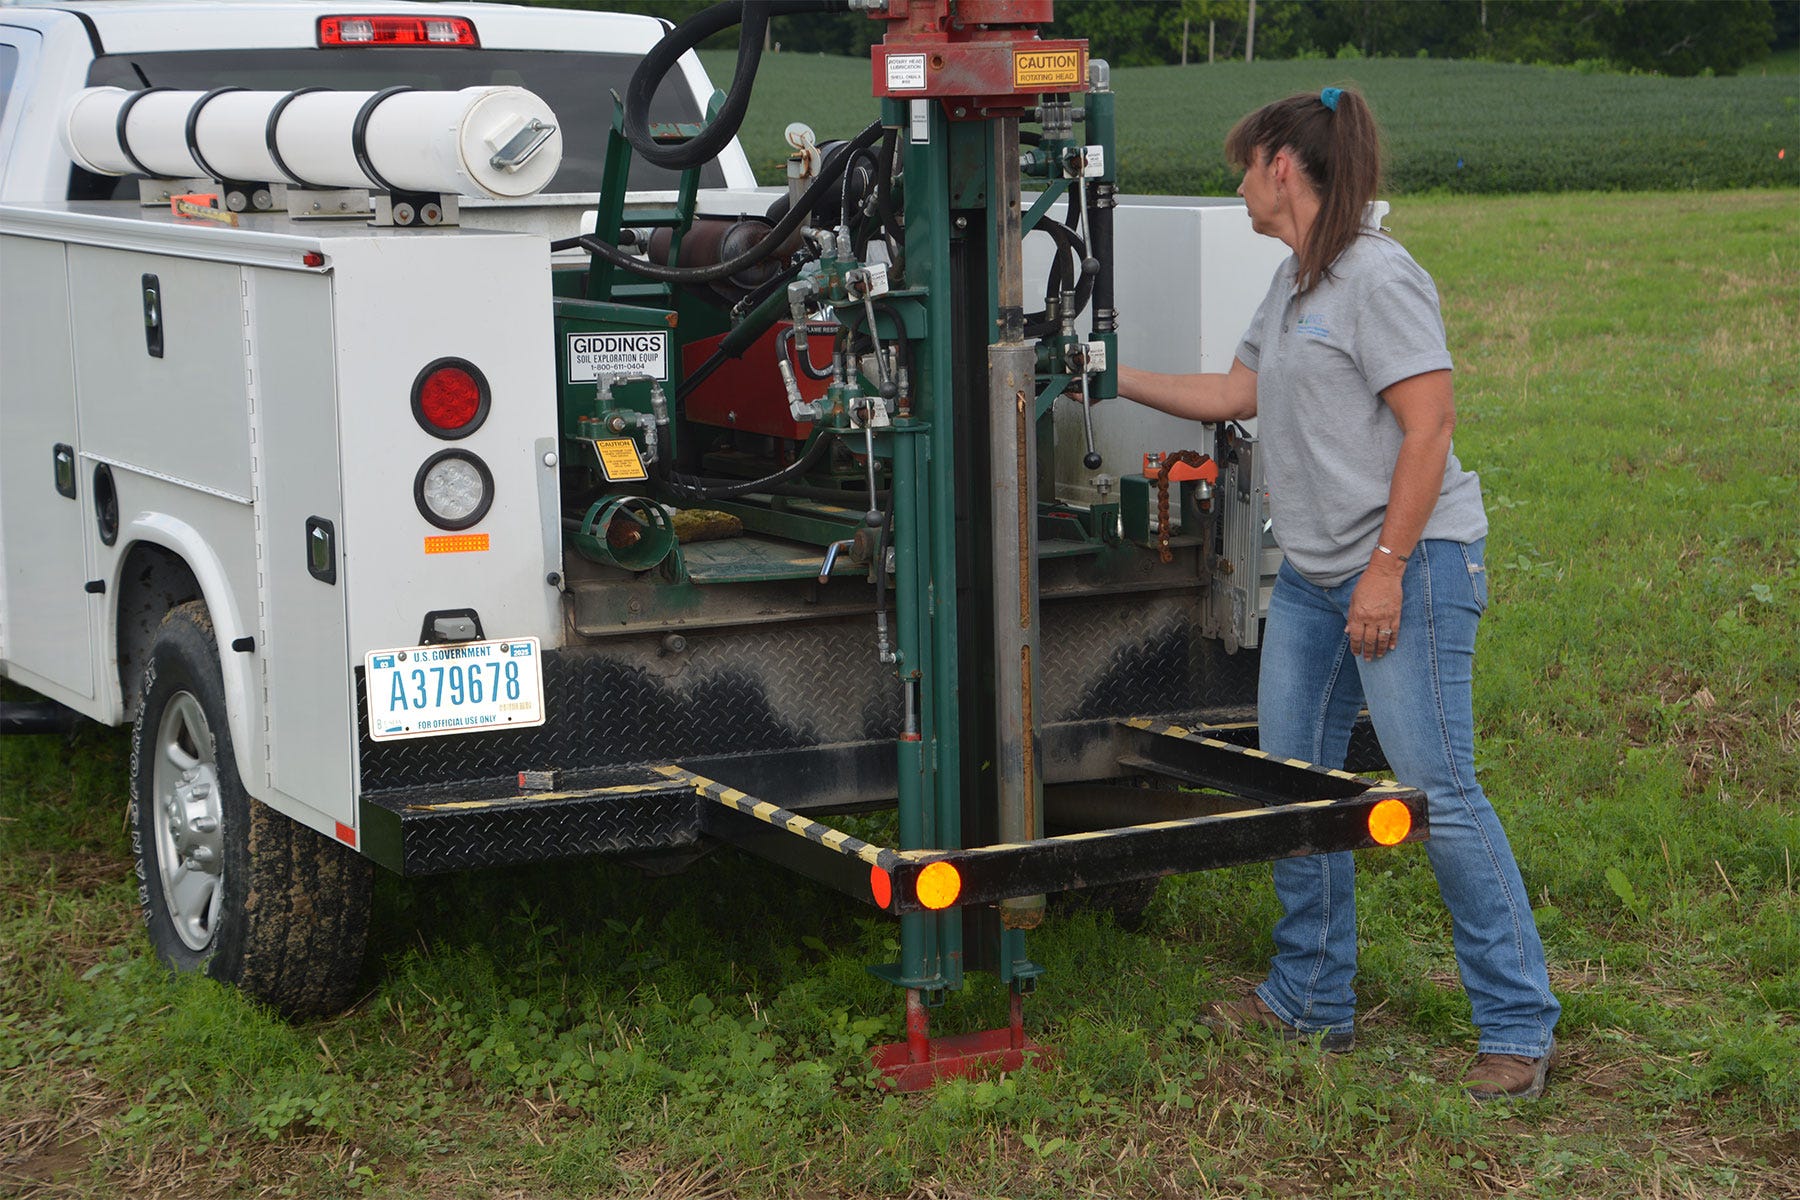 woman stands next to truck with a hydraulic probe for pulling soil sample cores